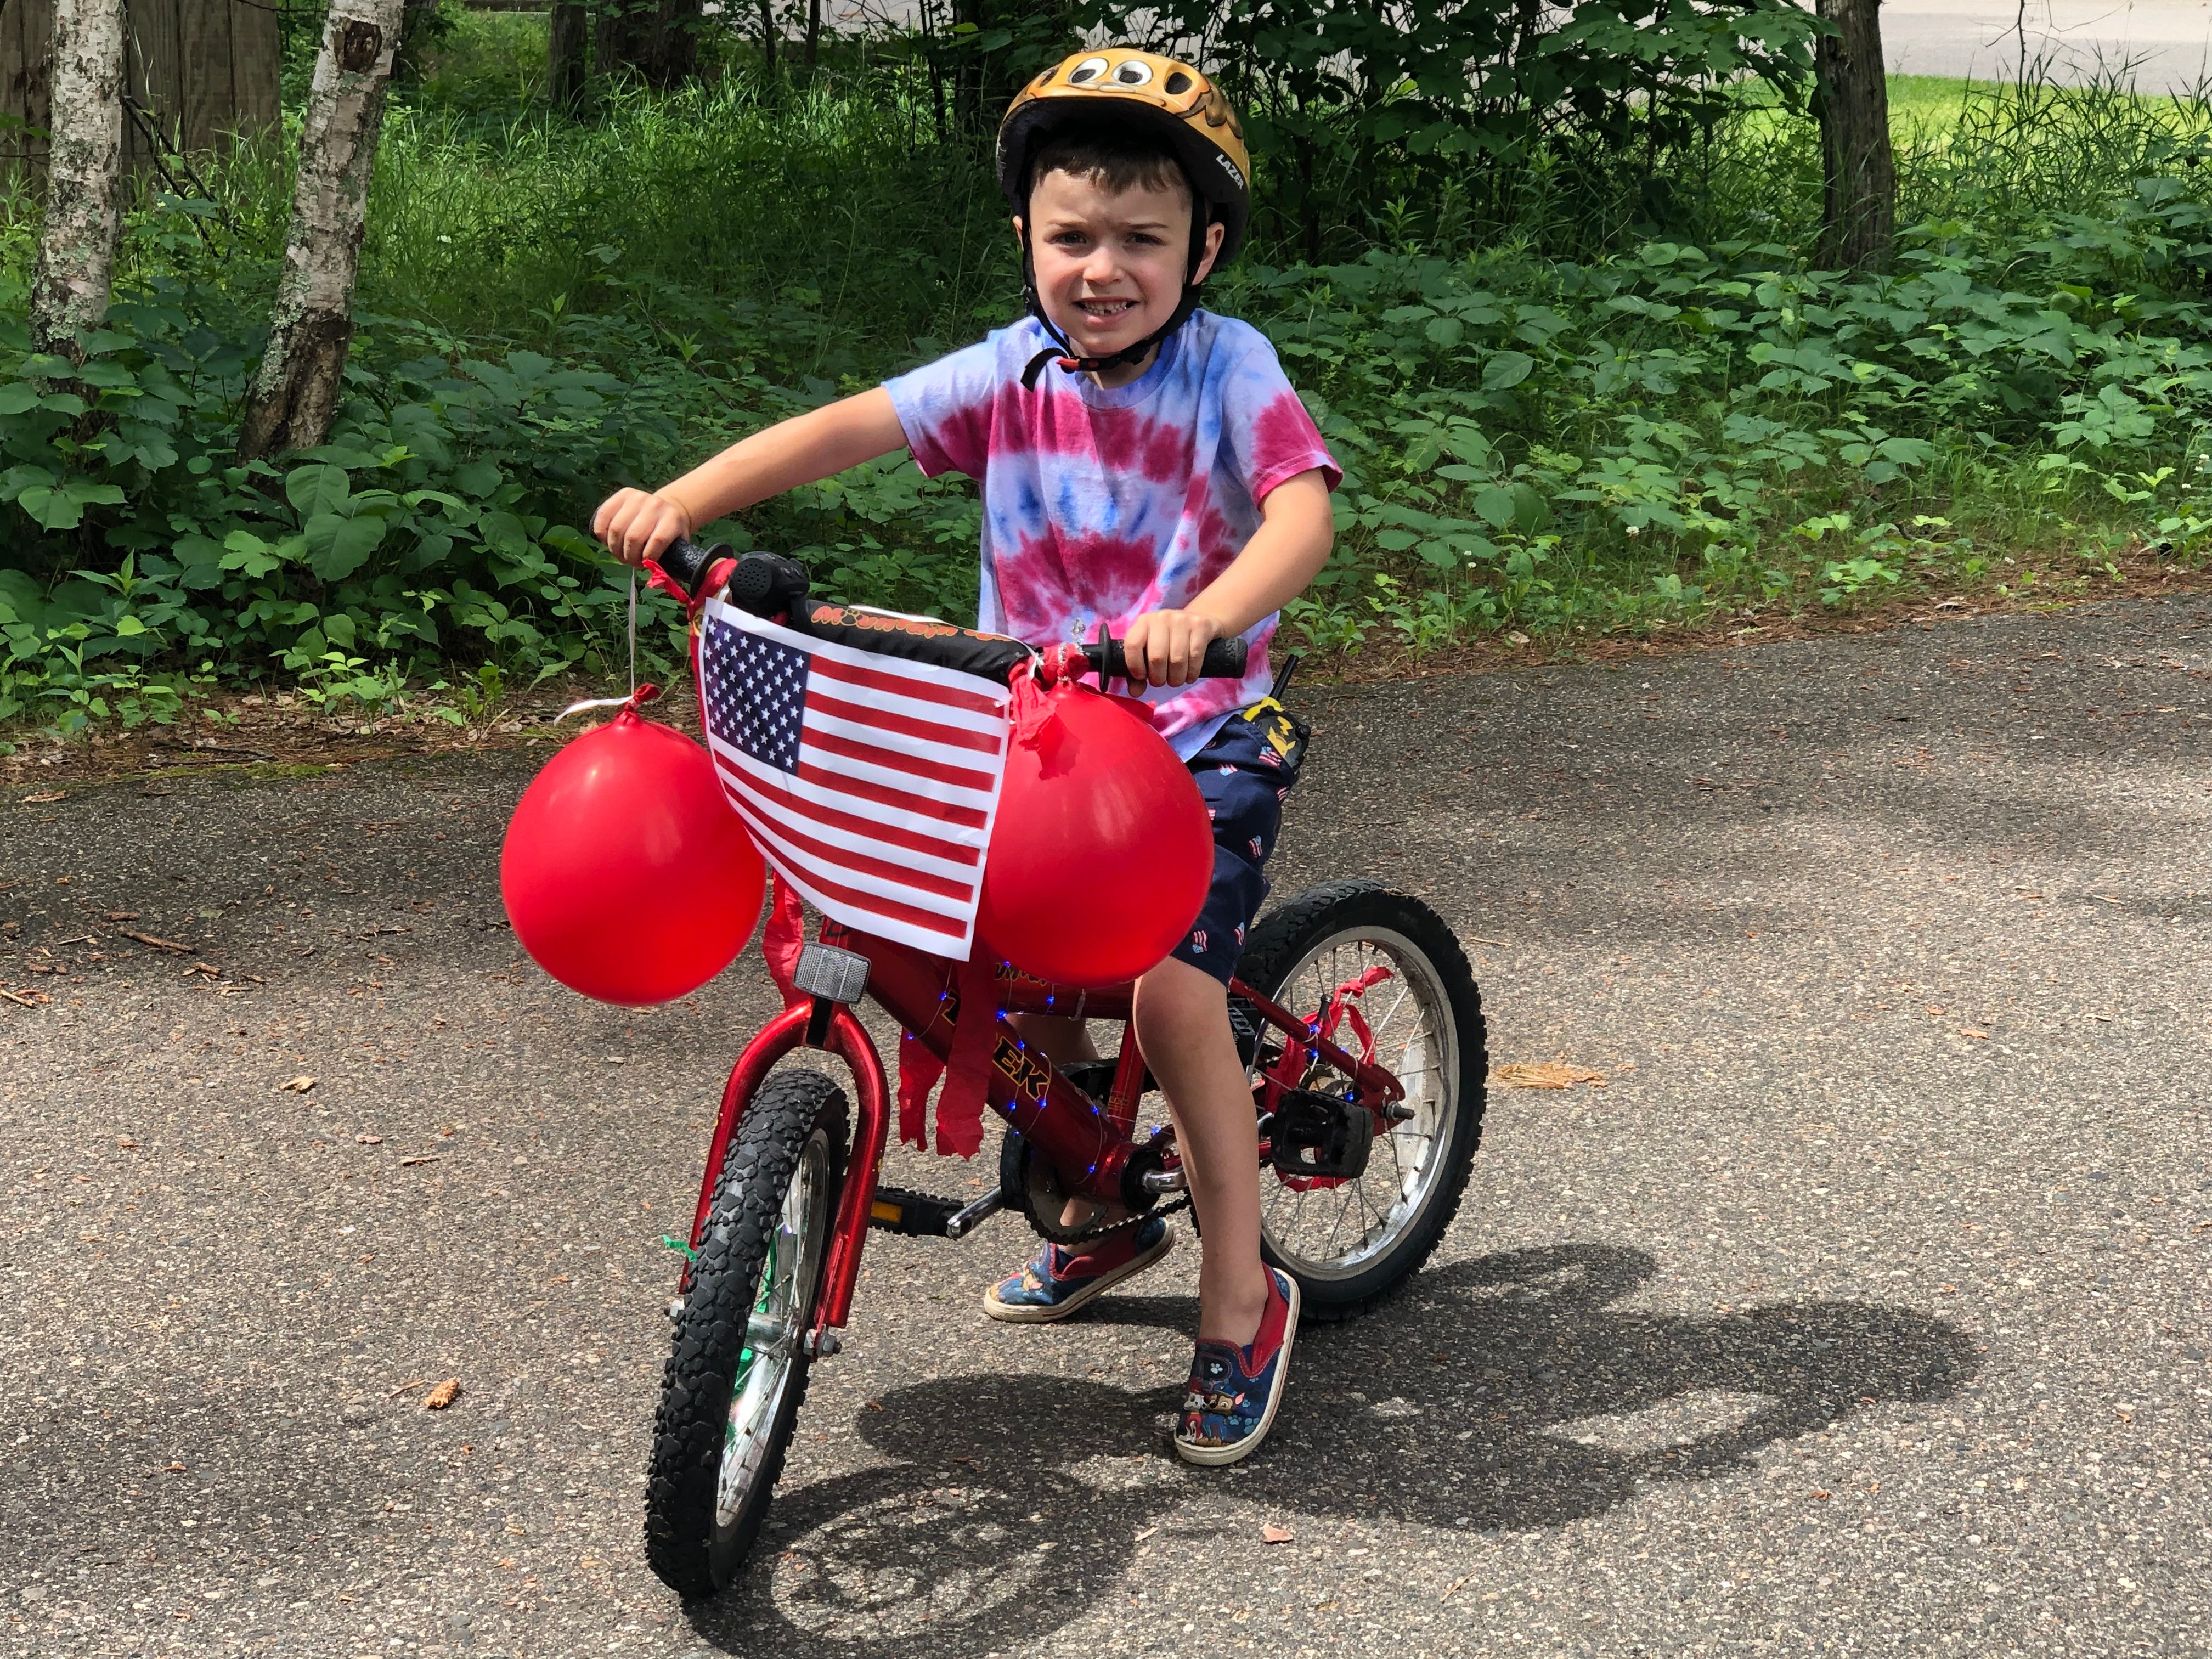 Just a few decorations after decorating our bikes at the visitor center for the Fourth of July